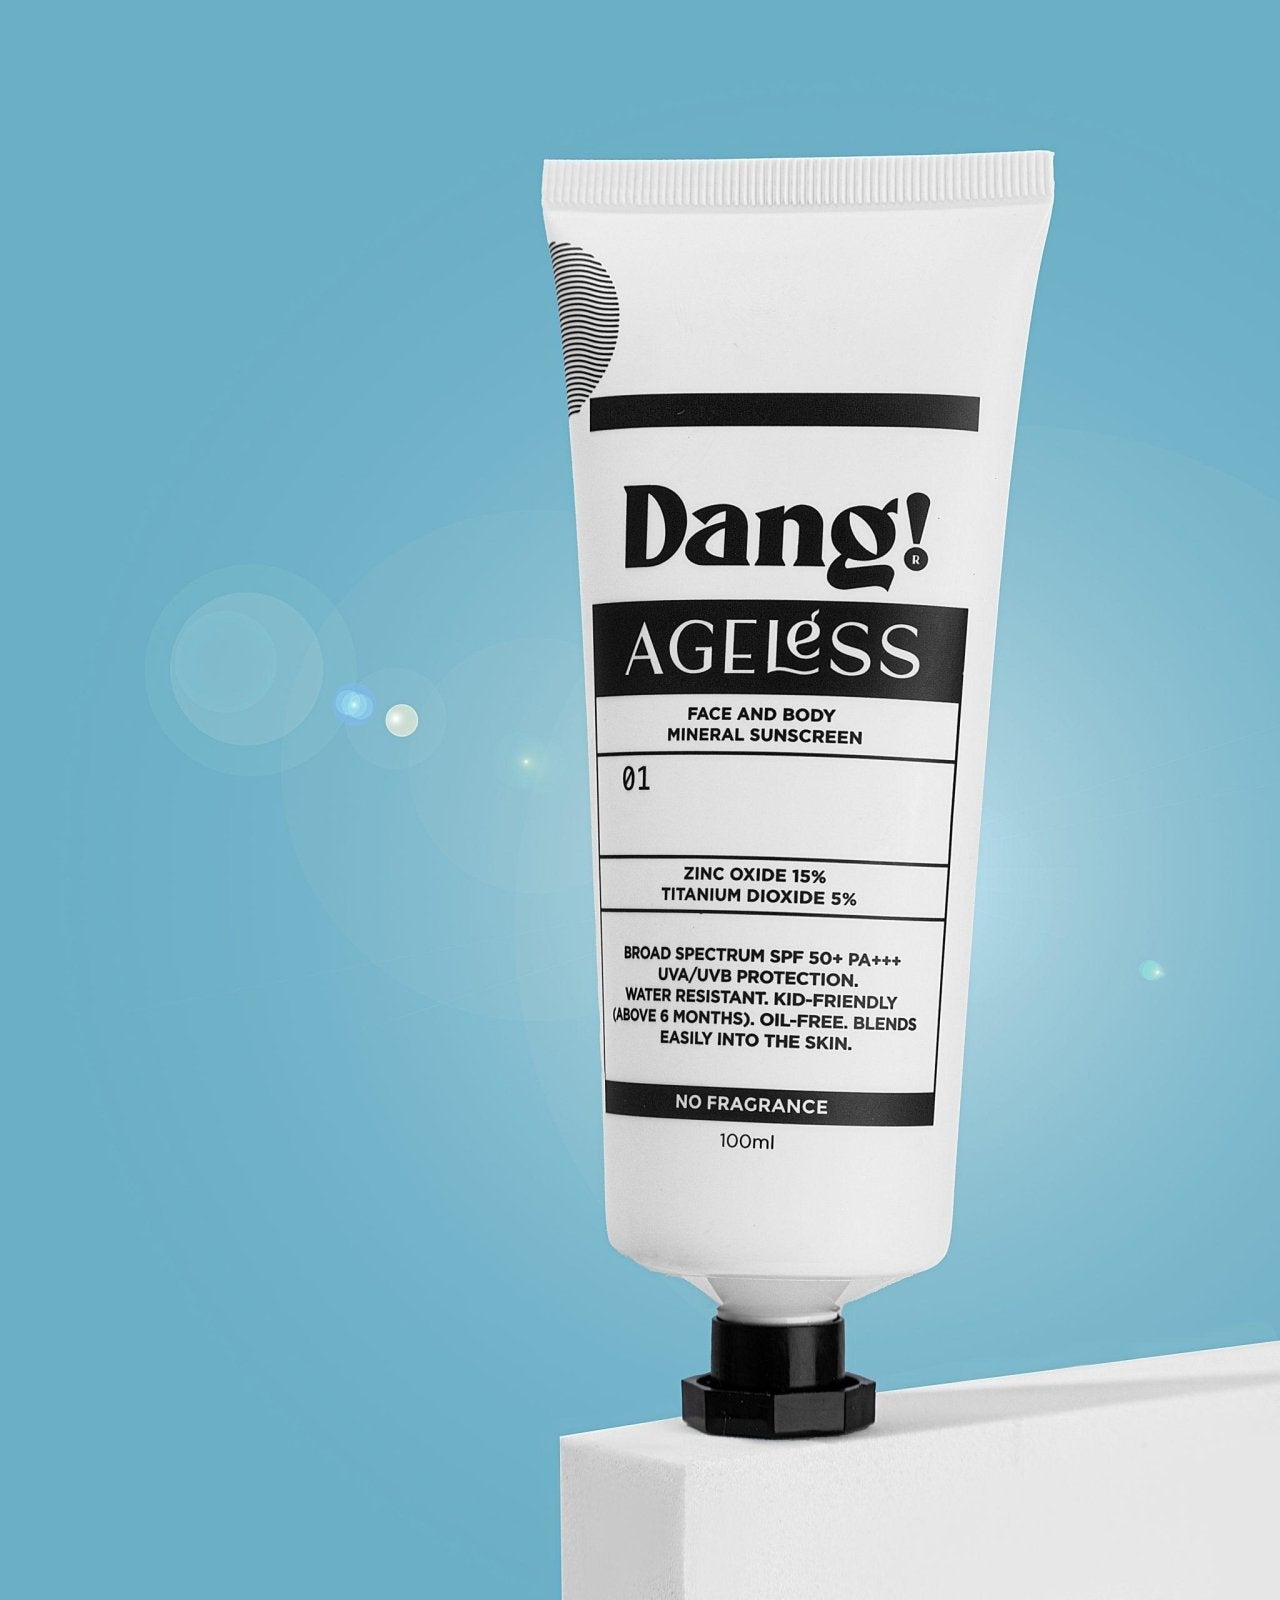 Dang! Ageless Face and Body Mineral sunscreen - Dang! Lifestyle Nigeria